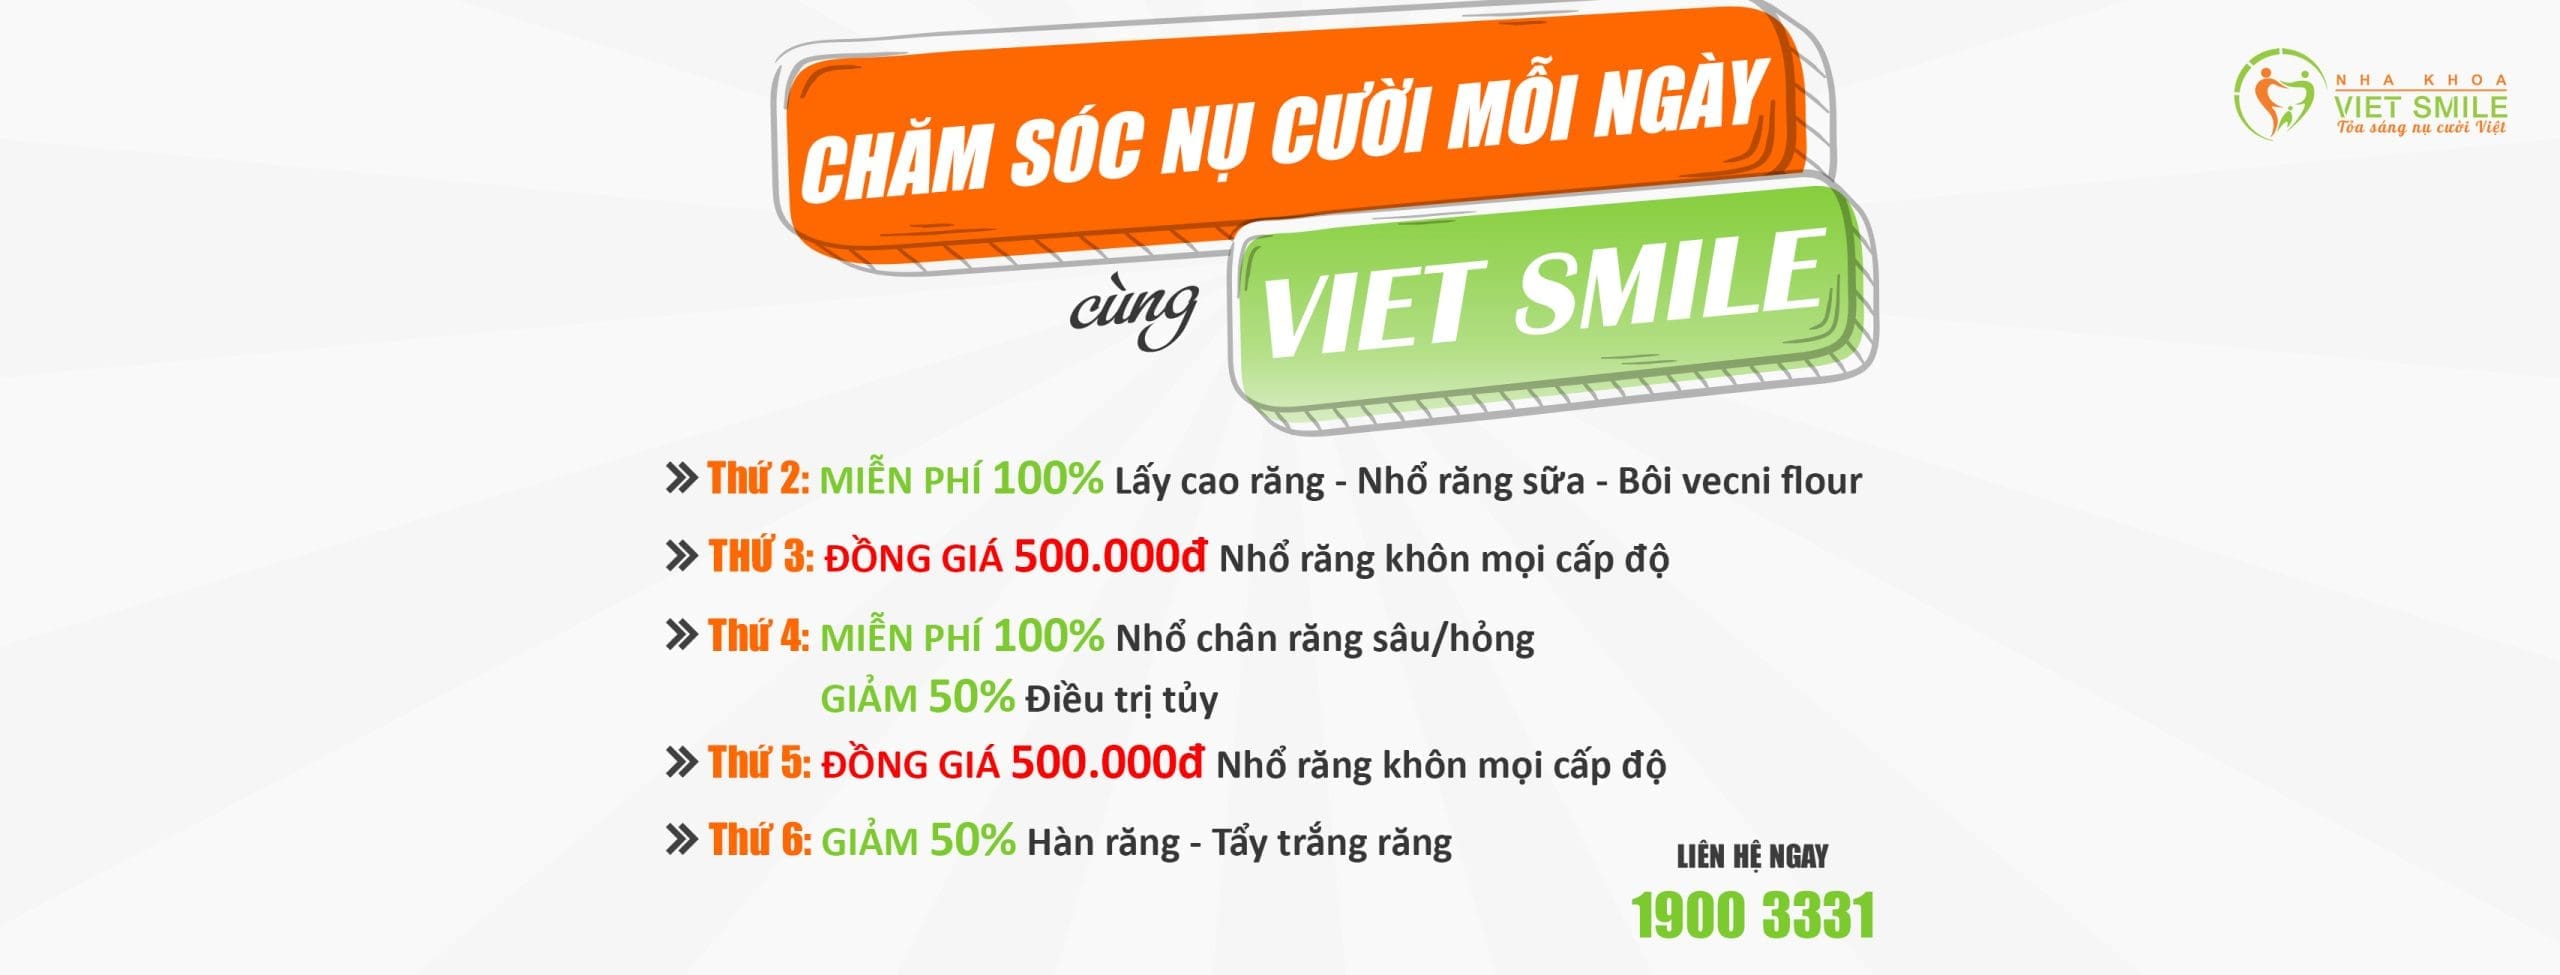 Cham soc nu cuoi moi ngay cung viet smile web scaled